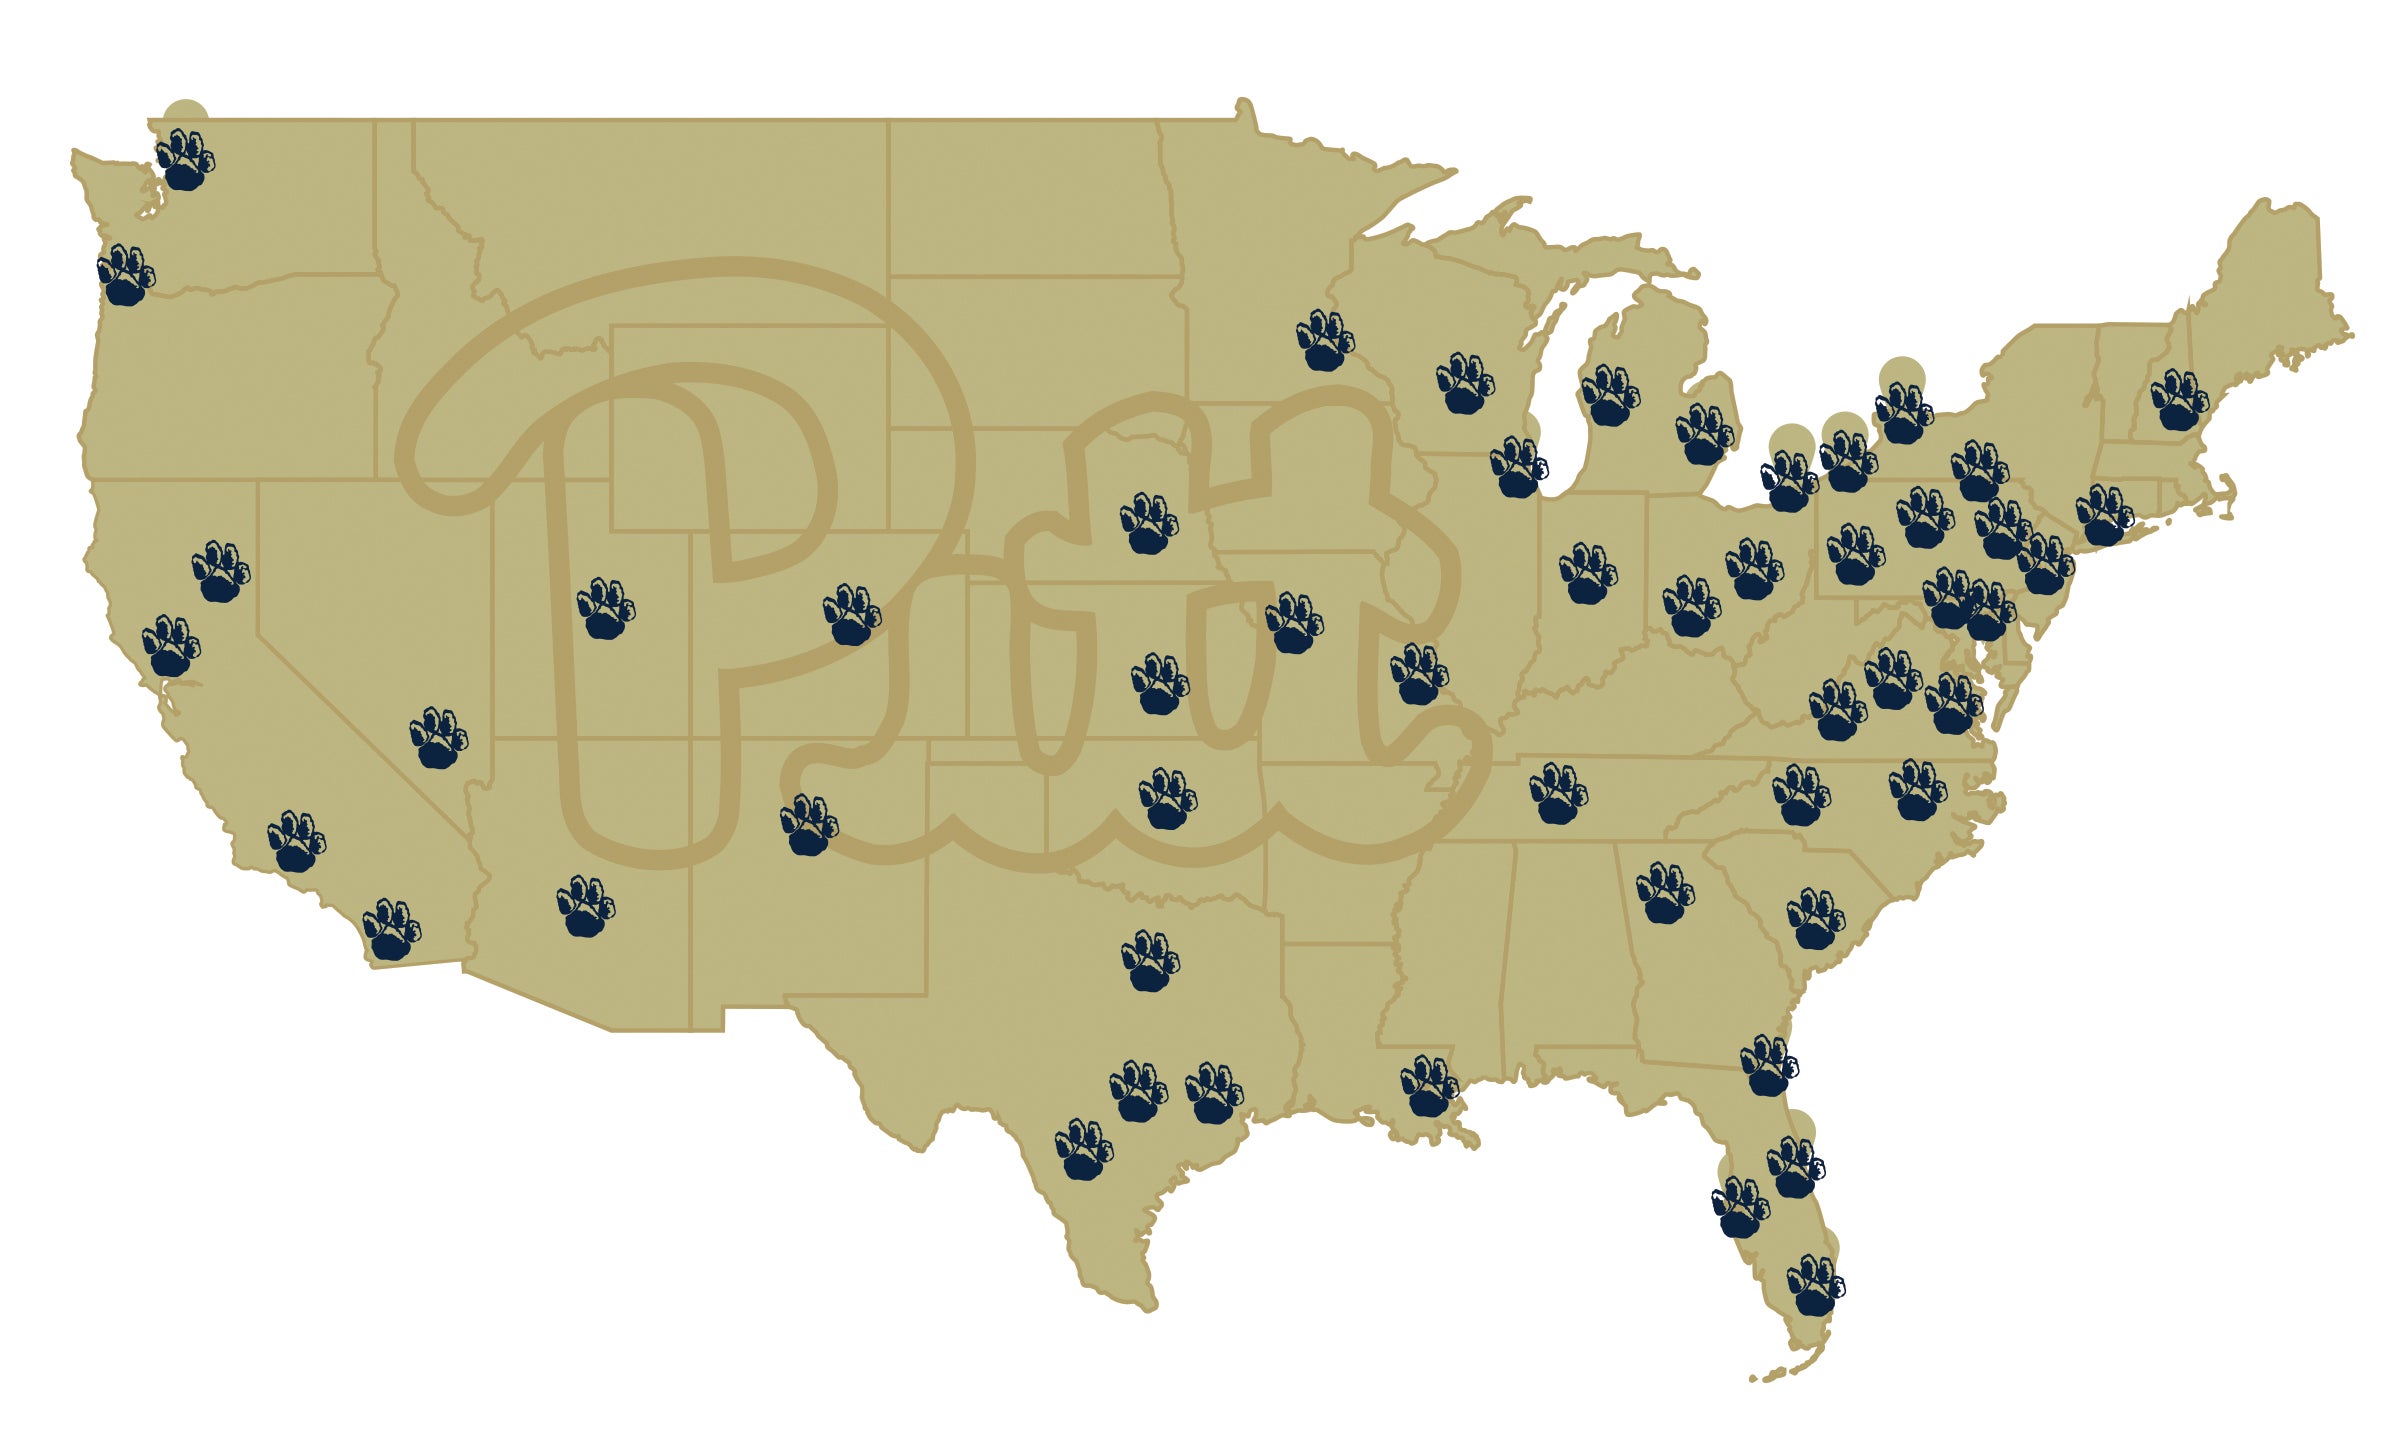 With the addition of New Mexico, Wisconsin, and Oklahoma, there are now Pitt Alumni Clubs in 32 states plus the District of Columbia. Regional clubs allow alumni to network, stay connected with the University, and share in some fun. Join a club near you or start one of your own at pi.tt/alumniclubs.